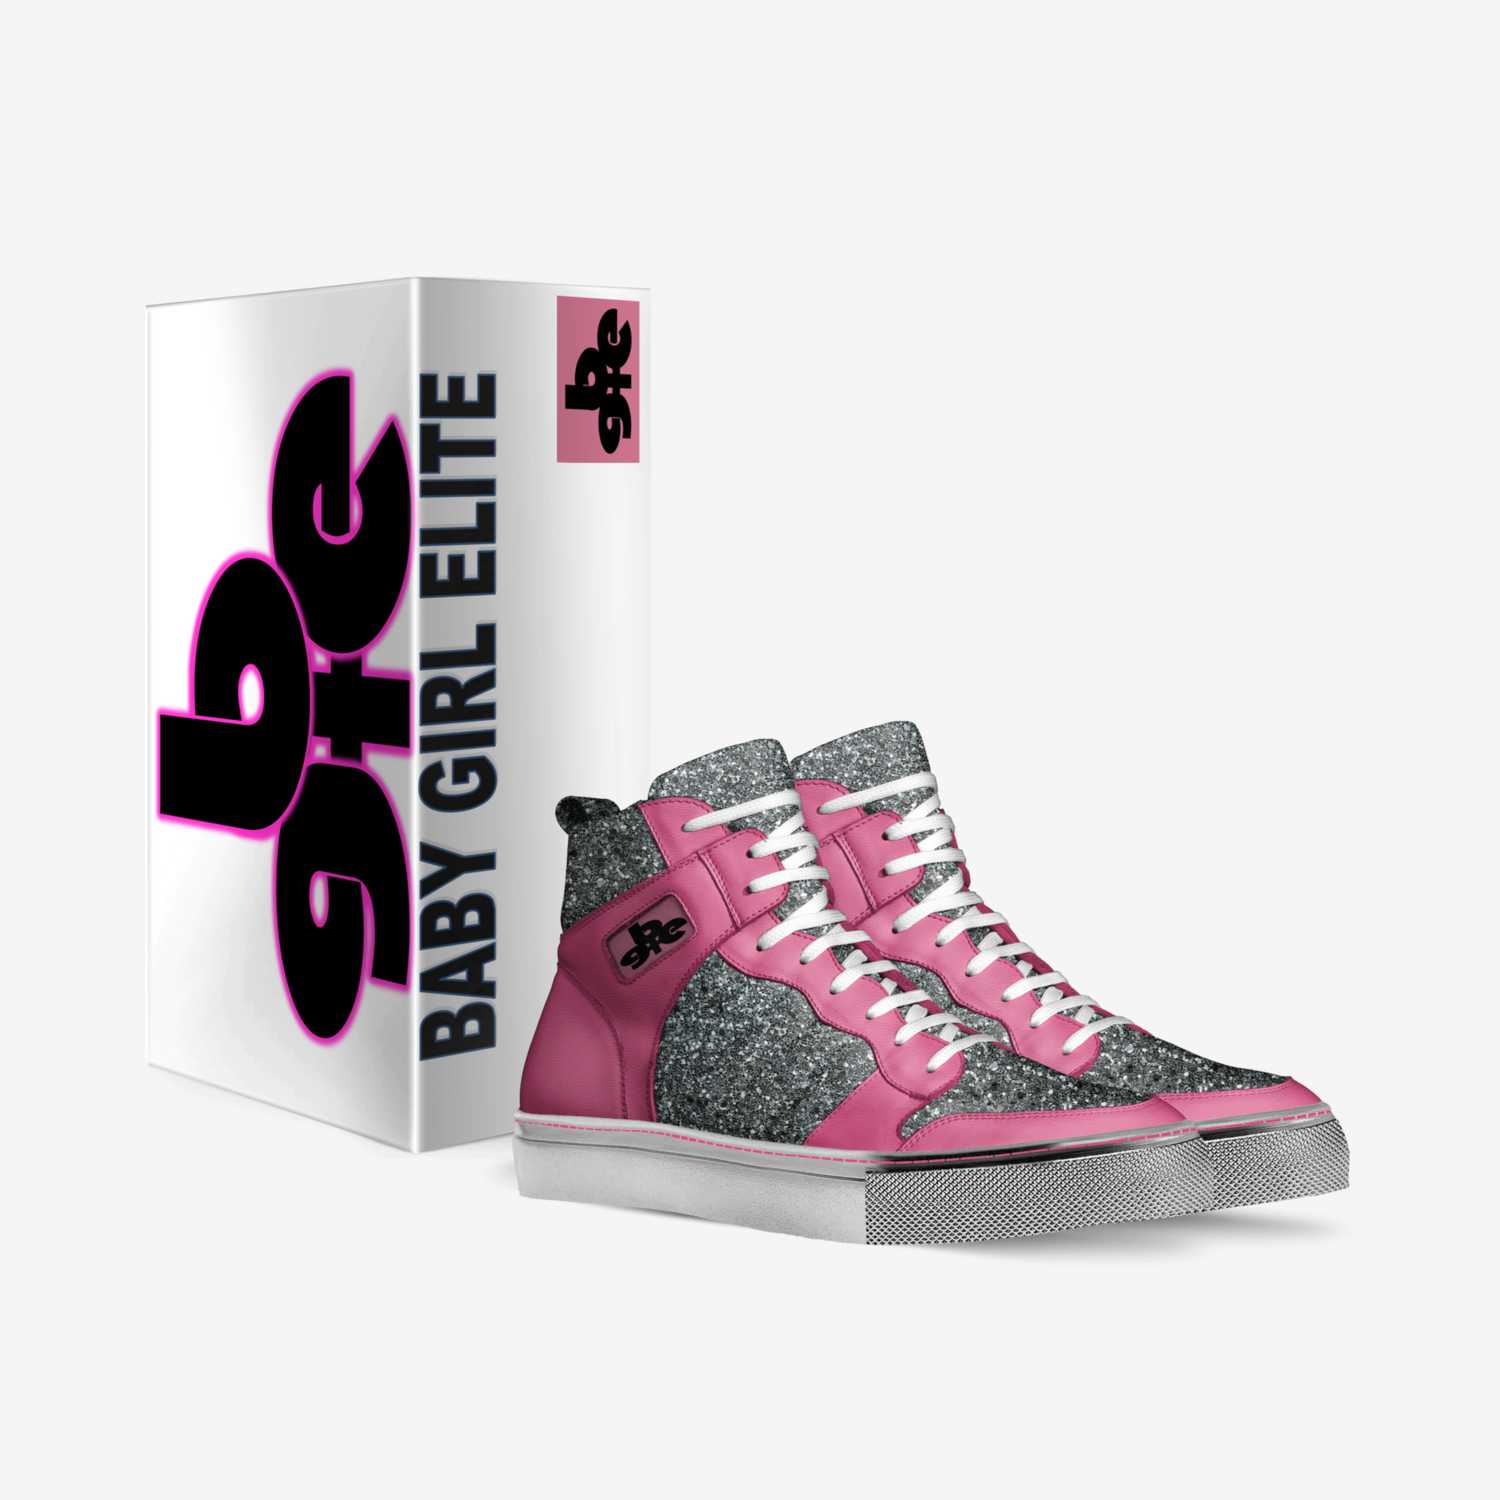 The Lashea's SJ1 custom made in Italy shoes by Baby-girl Elite | Box view